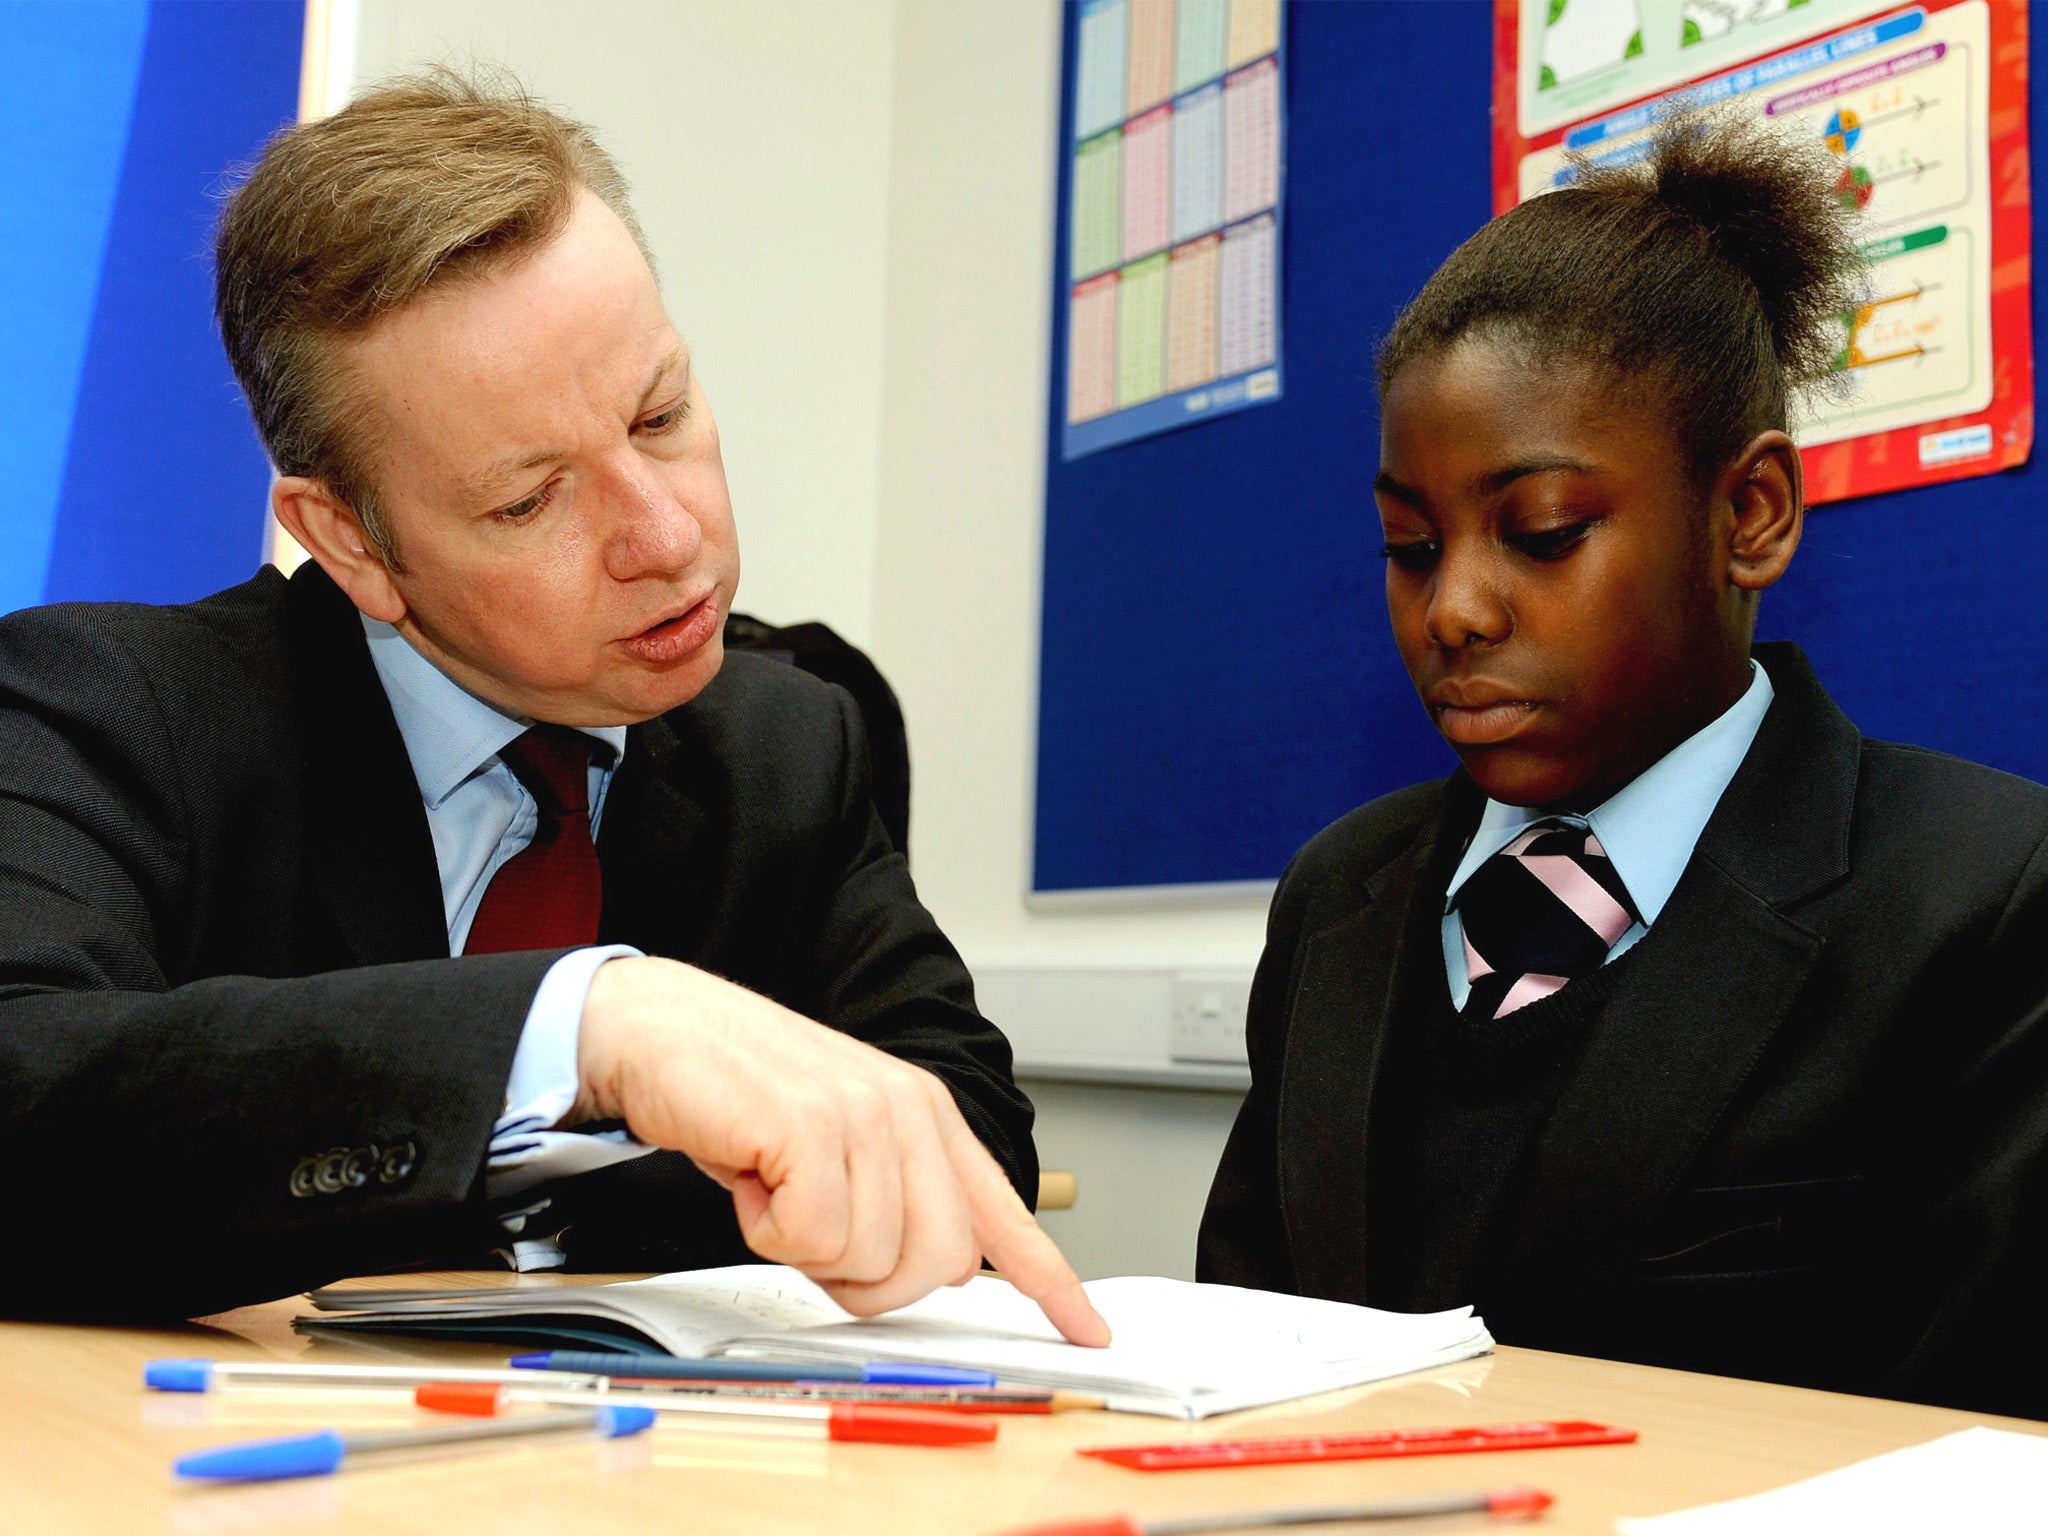 Michael Gove’s proposals for an EBacc would squeeze out non-core subjects, argues Lord Baker